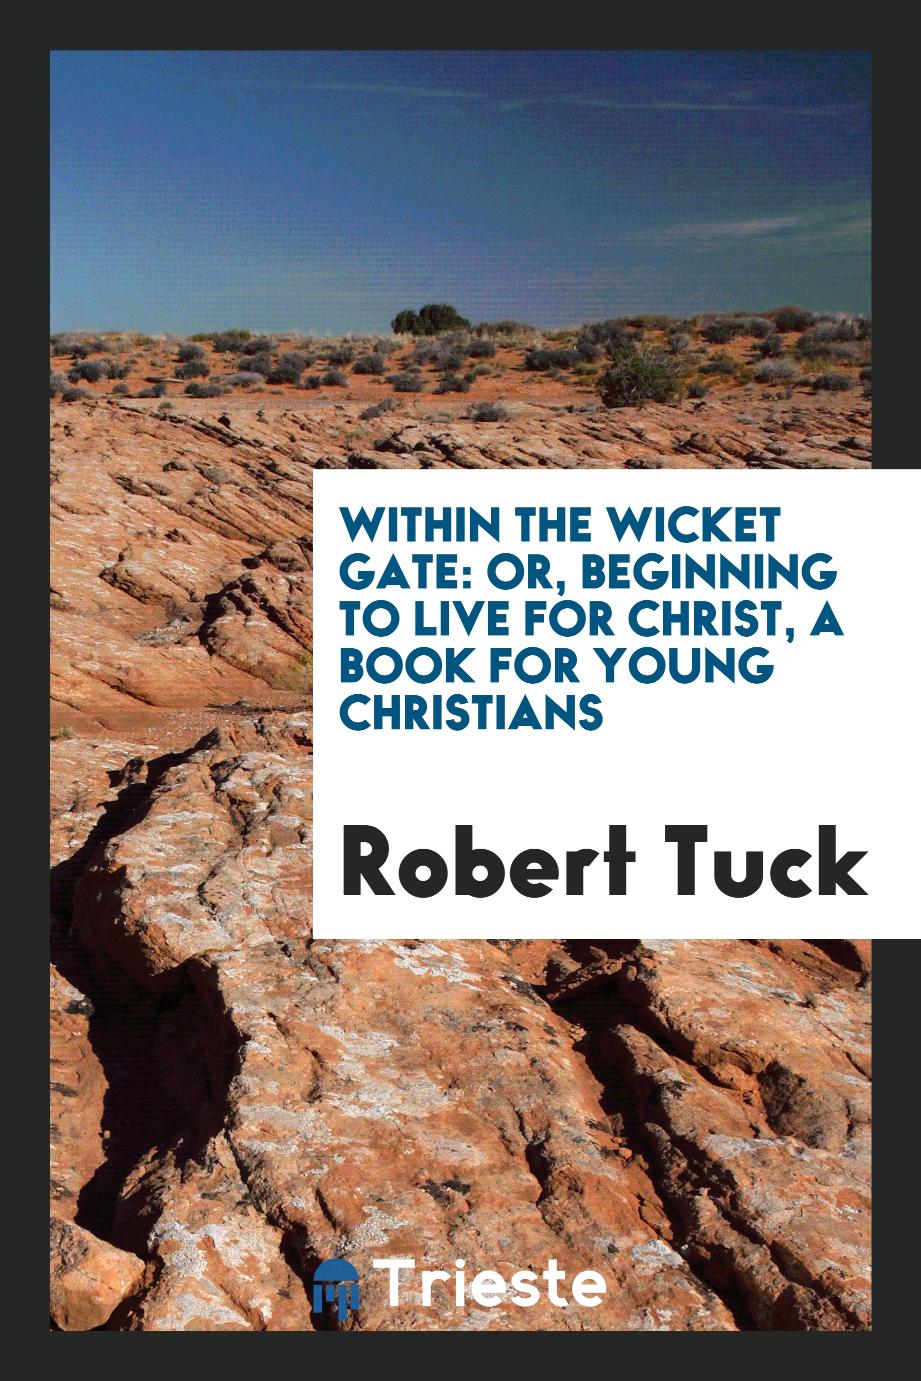 Within the Wicket Gate: Or, Beginning to Live for Christ, a Book for Young Christians